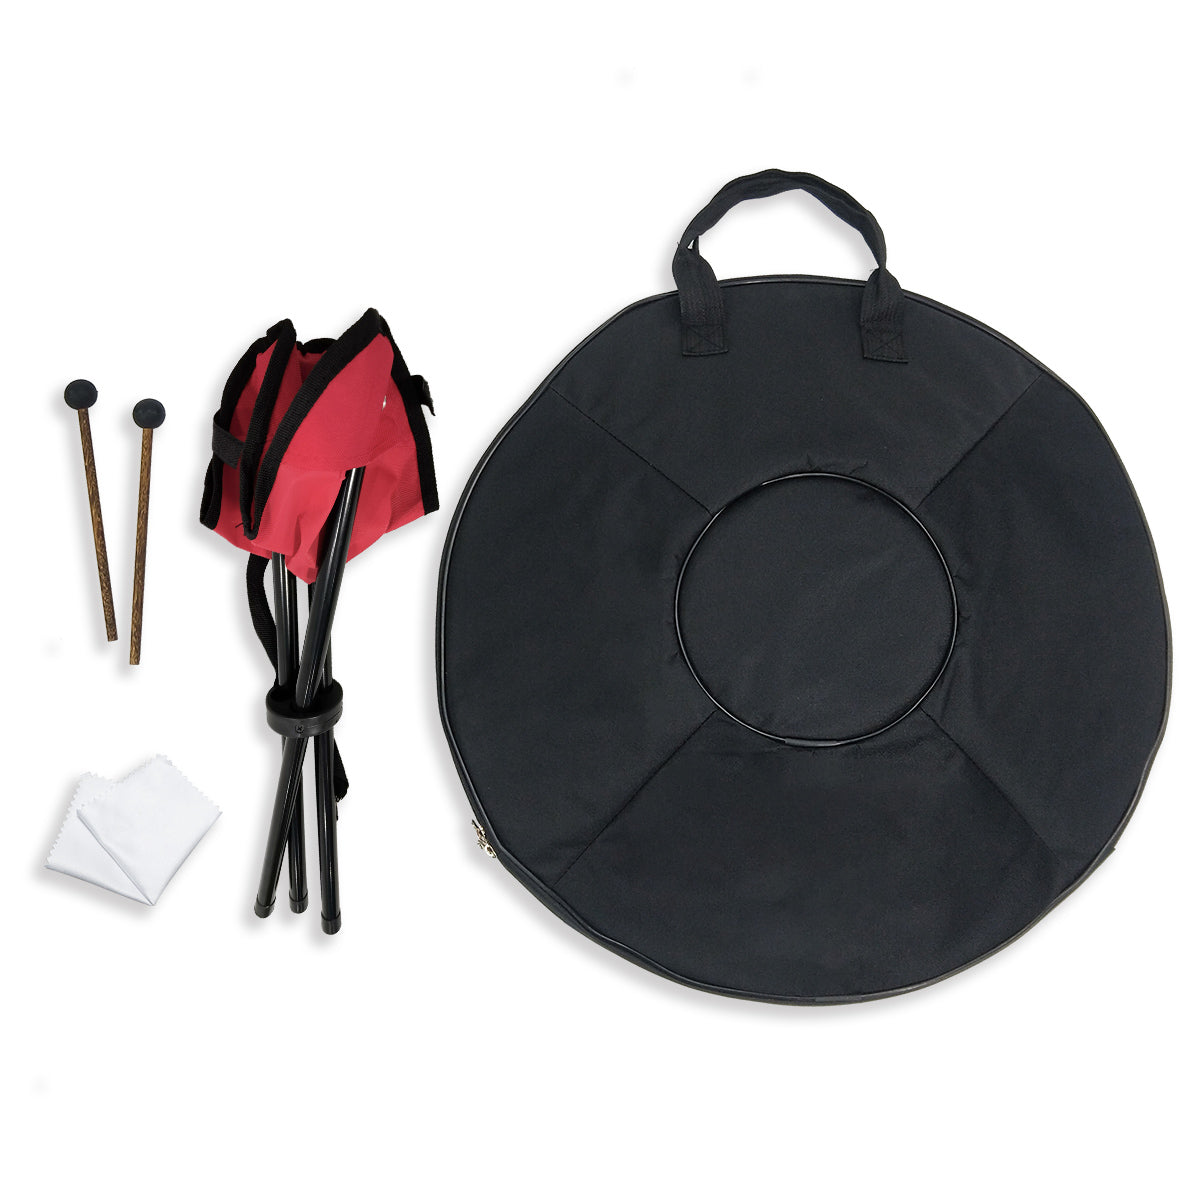 Tak Drum Handpan Sterling Silver 9 Notes D Minor Scale Hangdrum with gift set